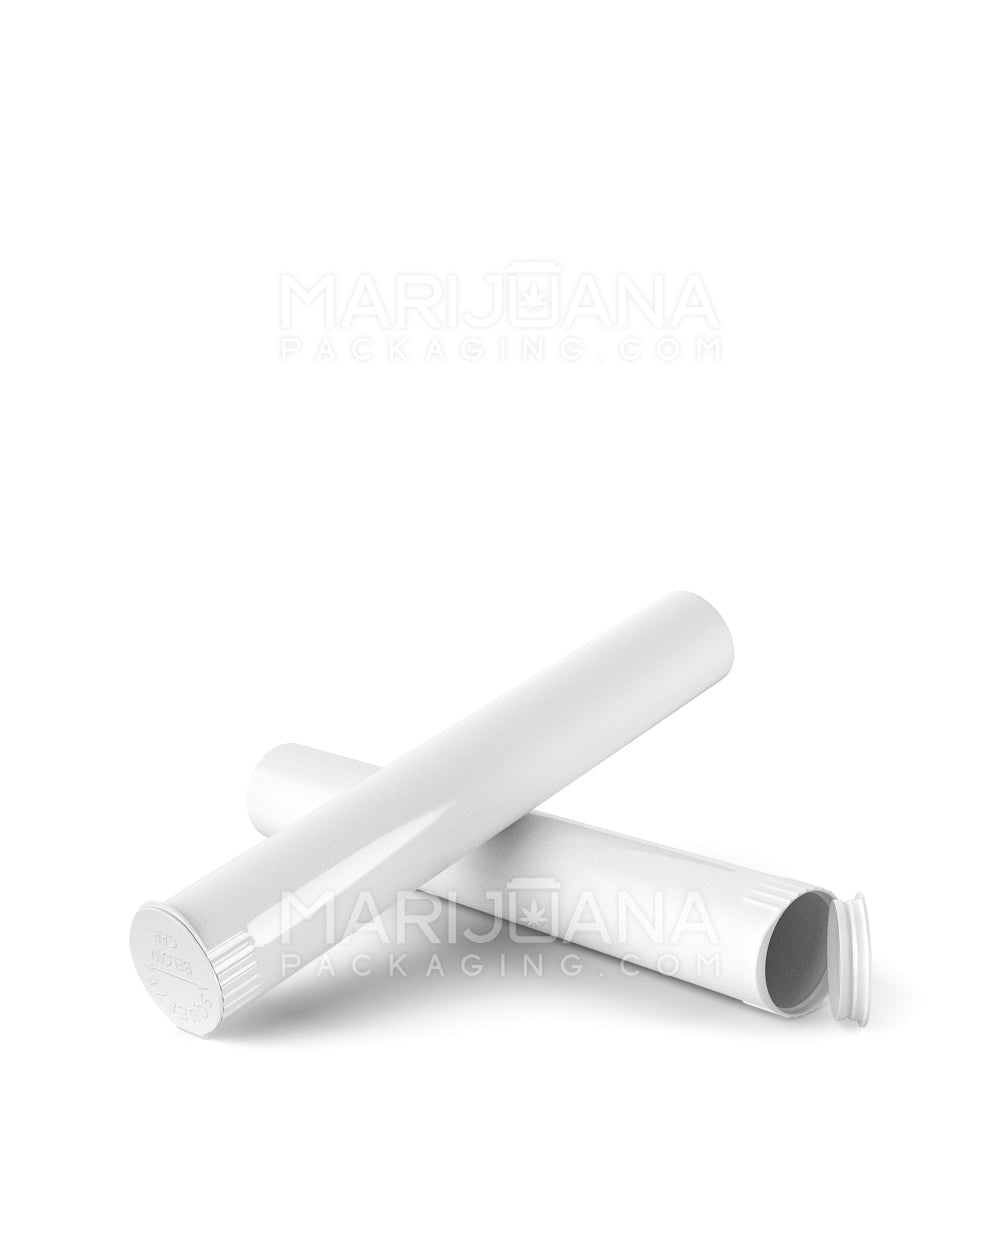 Child Resistant | King Size Pop Top Opaque Plastic Pre-Roll Tubes | 116mm - White - 1000 Count - 8